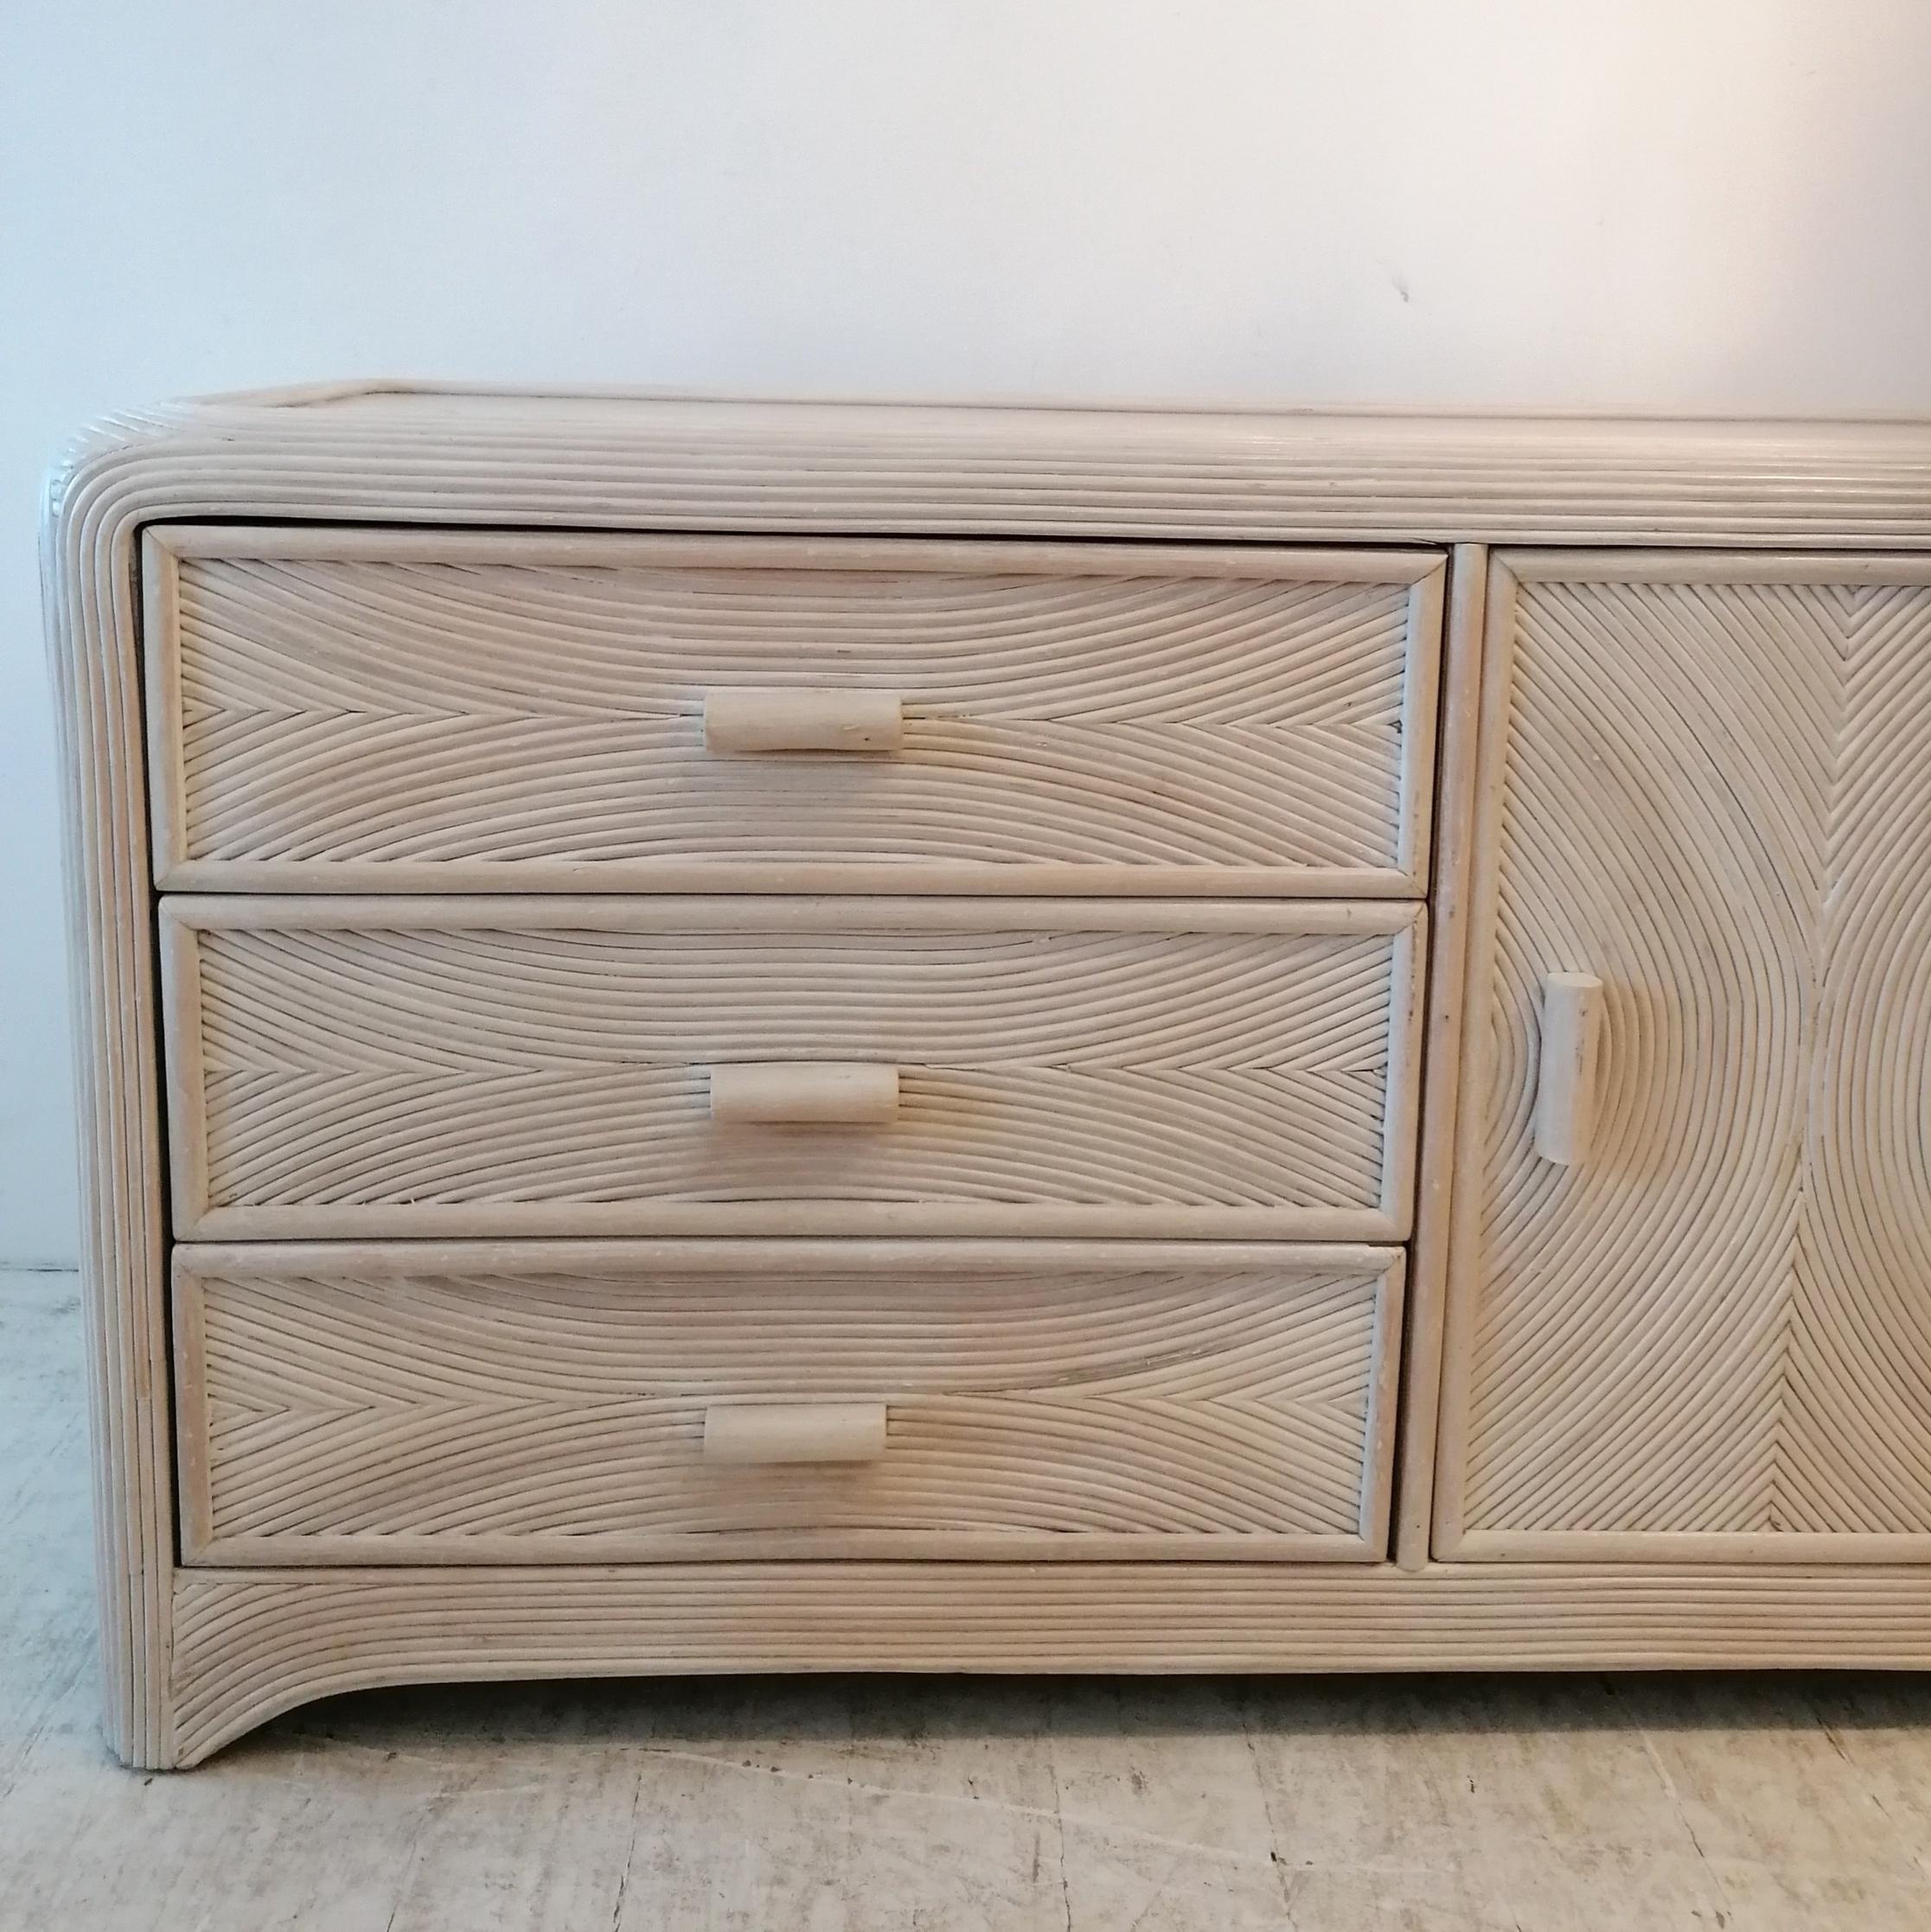 Vintage American cream pencil reed / cane sideboard with drawers c1970s 4